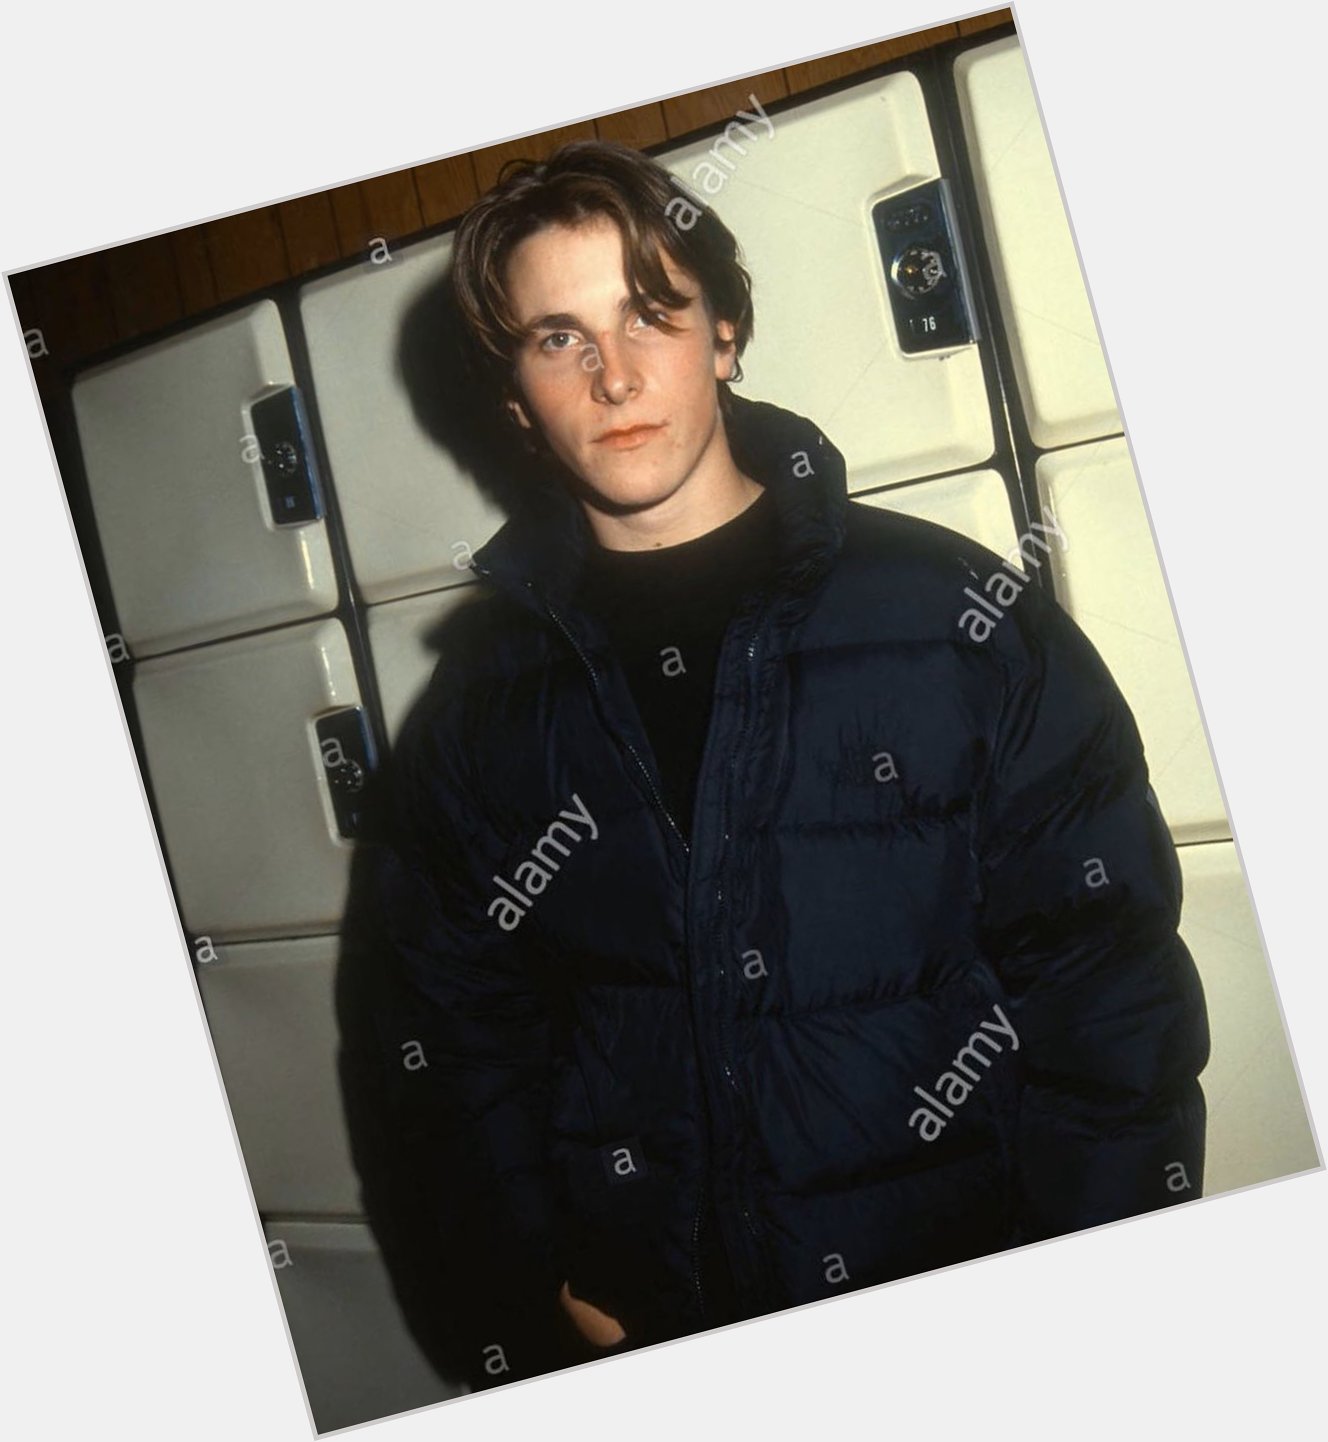 A very happy 46th birthday to Christian Bale! In these photos, he is celebrating his 18th! 